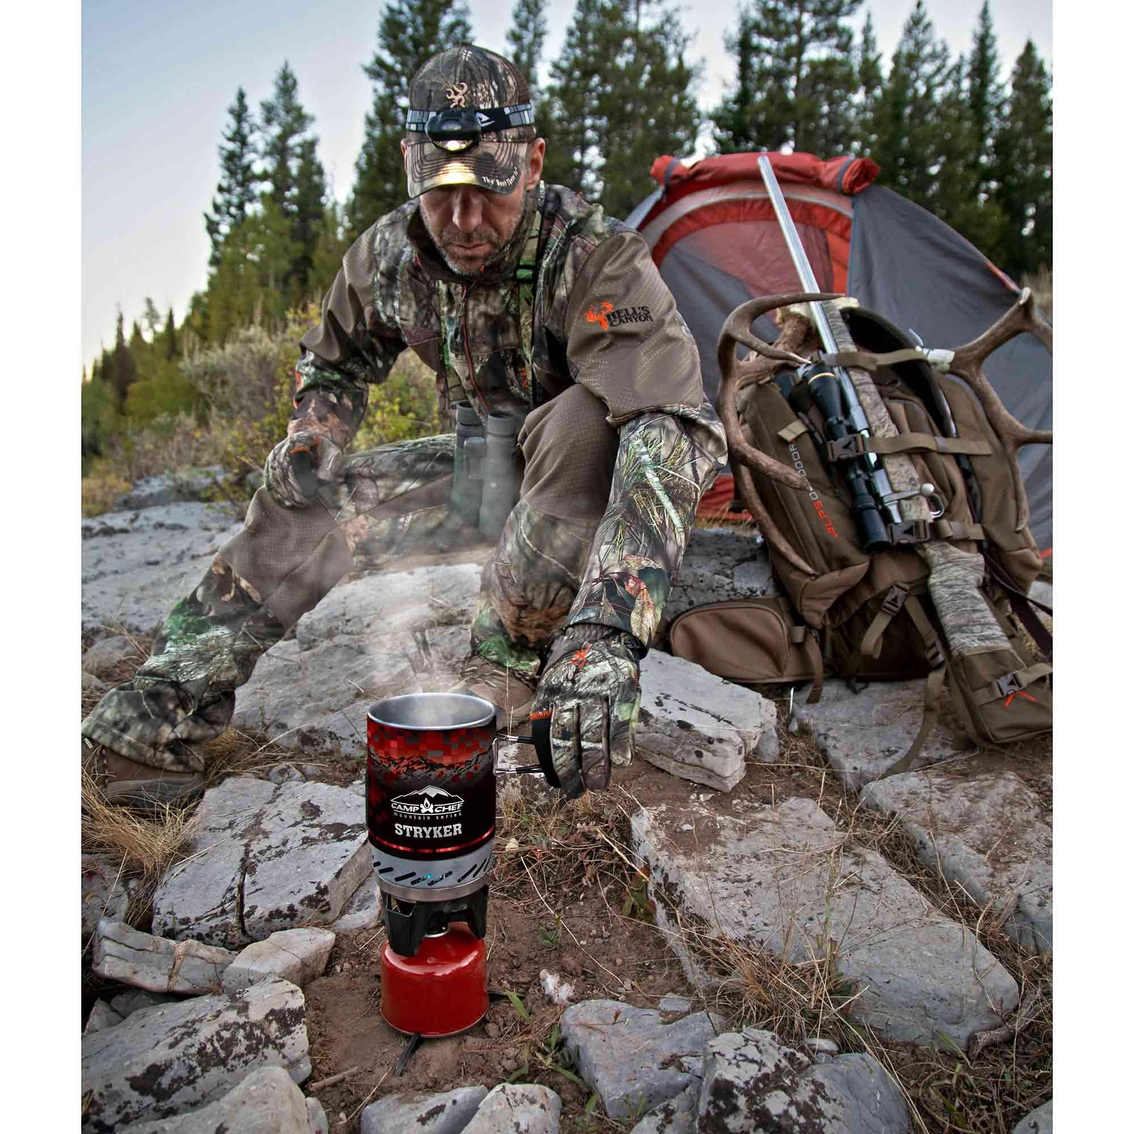 Camp Chef Stryker Isobutane Stove - Image 4 of 4